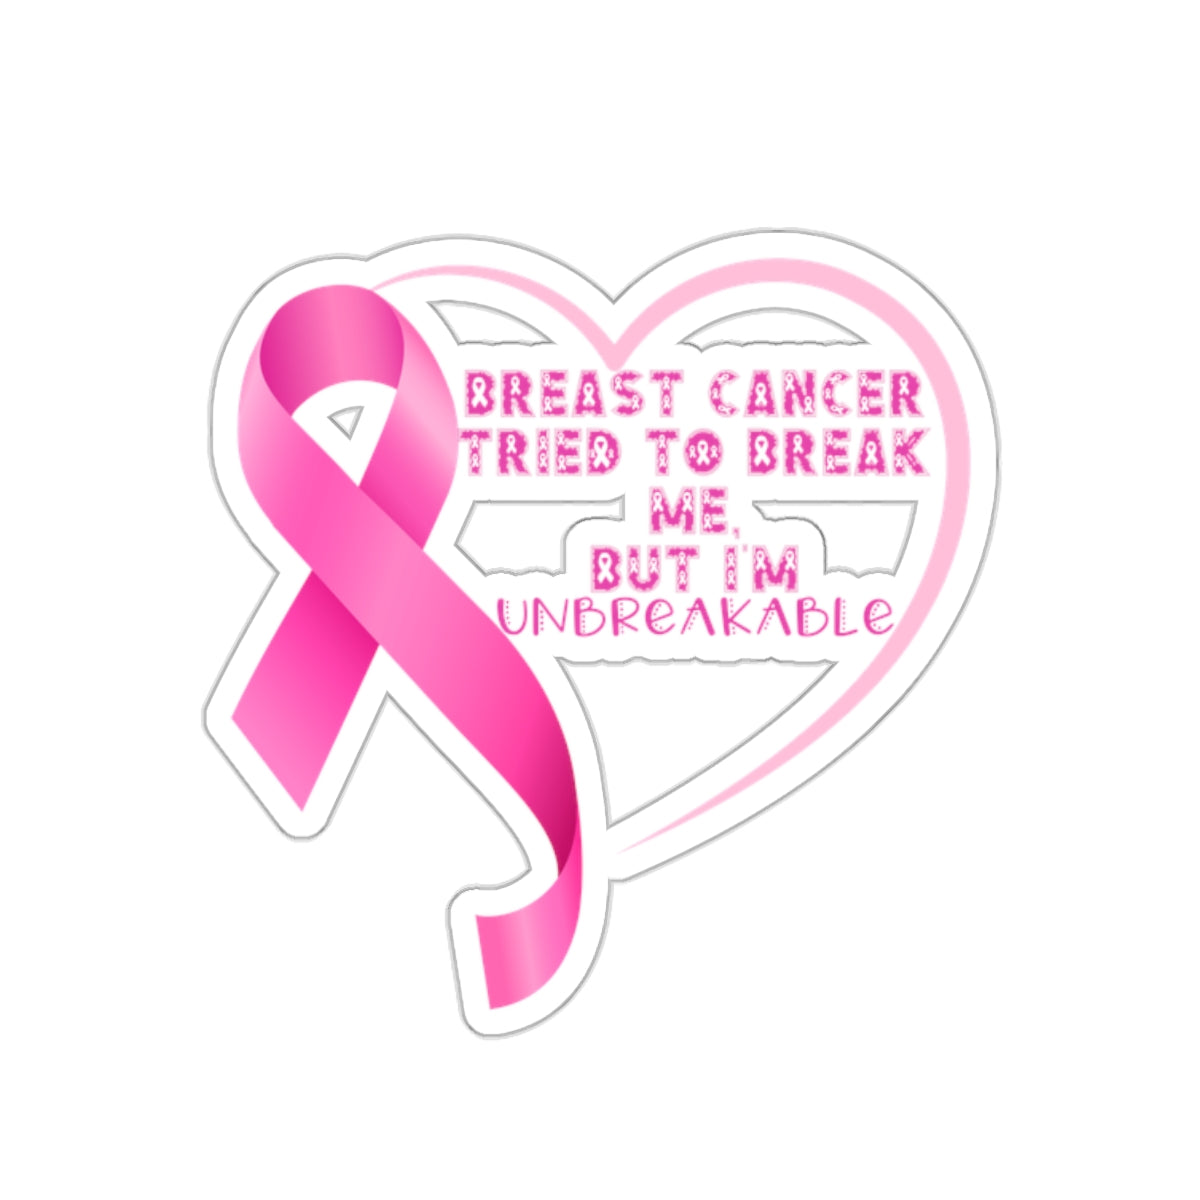 Breast Cancer Unbreakable Inspirational Quote Kiss-Cut Stickers-Paper products-2" × 2"-White-mysticalcherry